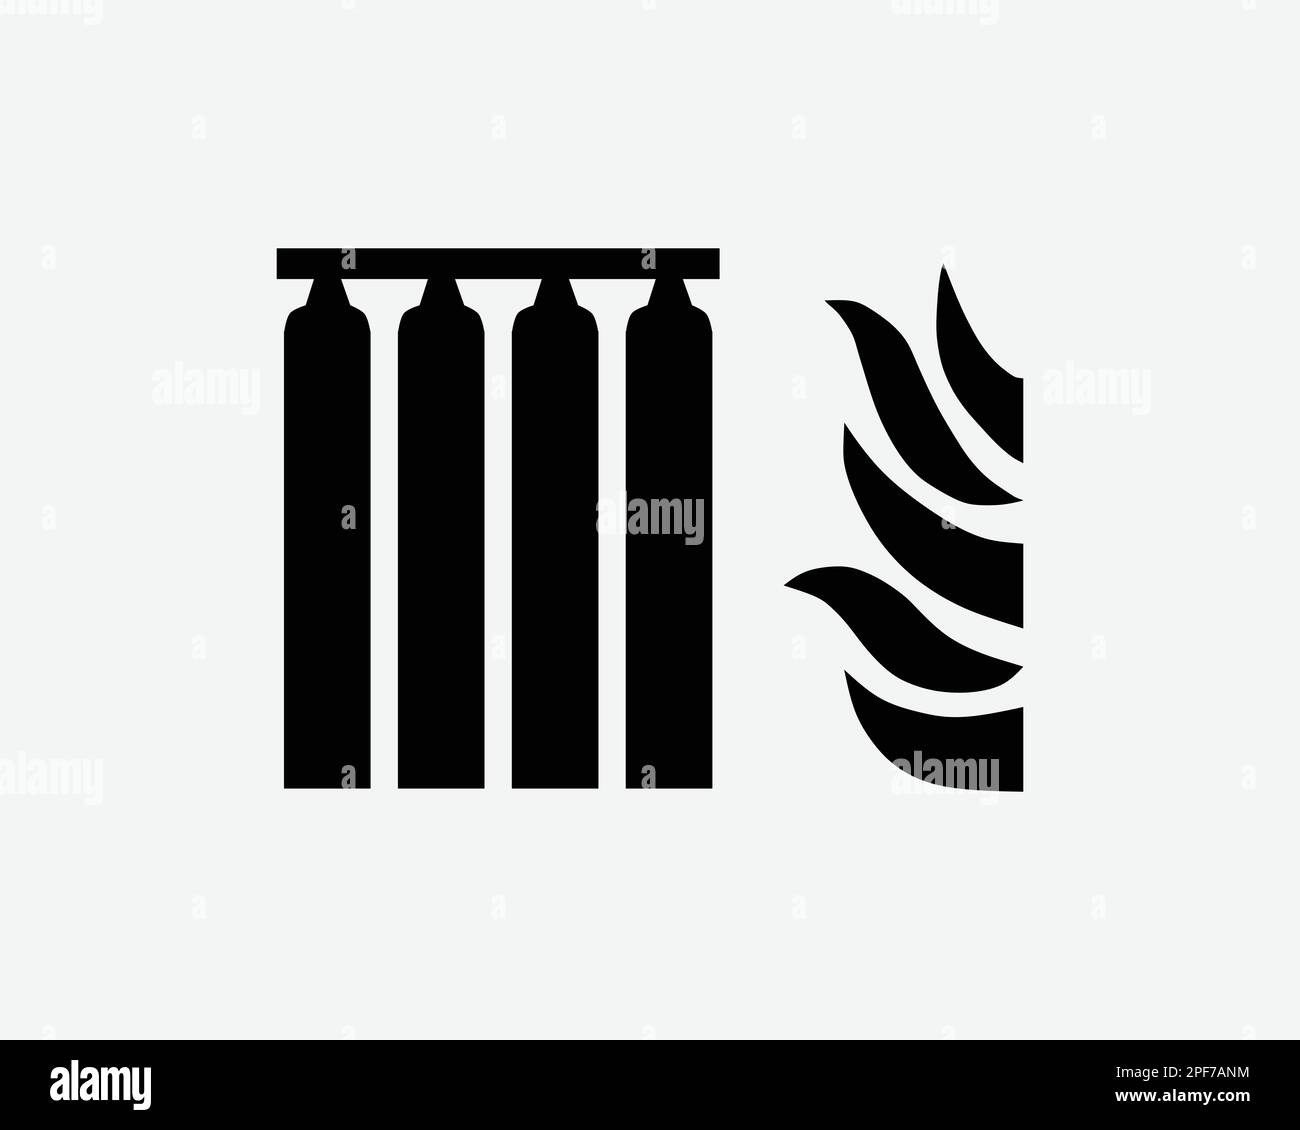 Fixed Fire Extinguisher Suppression System Equipment Black White Silhouette Sign Symbol Icon Clipart Graphic Artwork Pictogram Illustration Vector Stock Vector